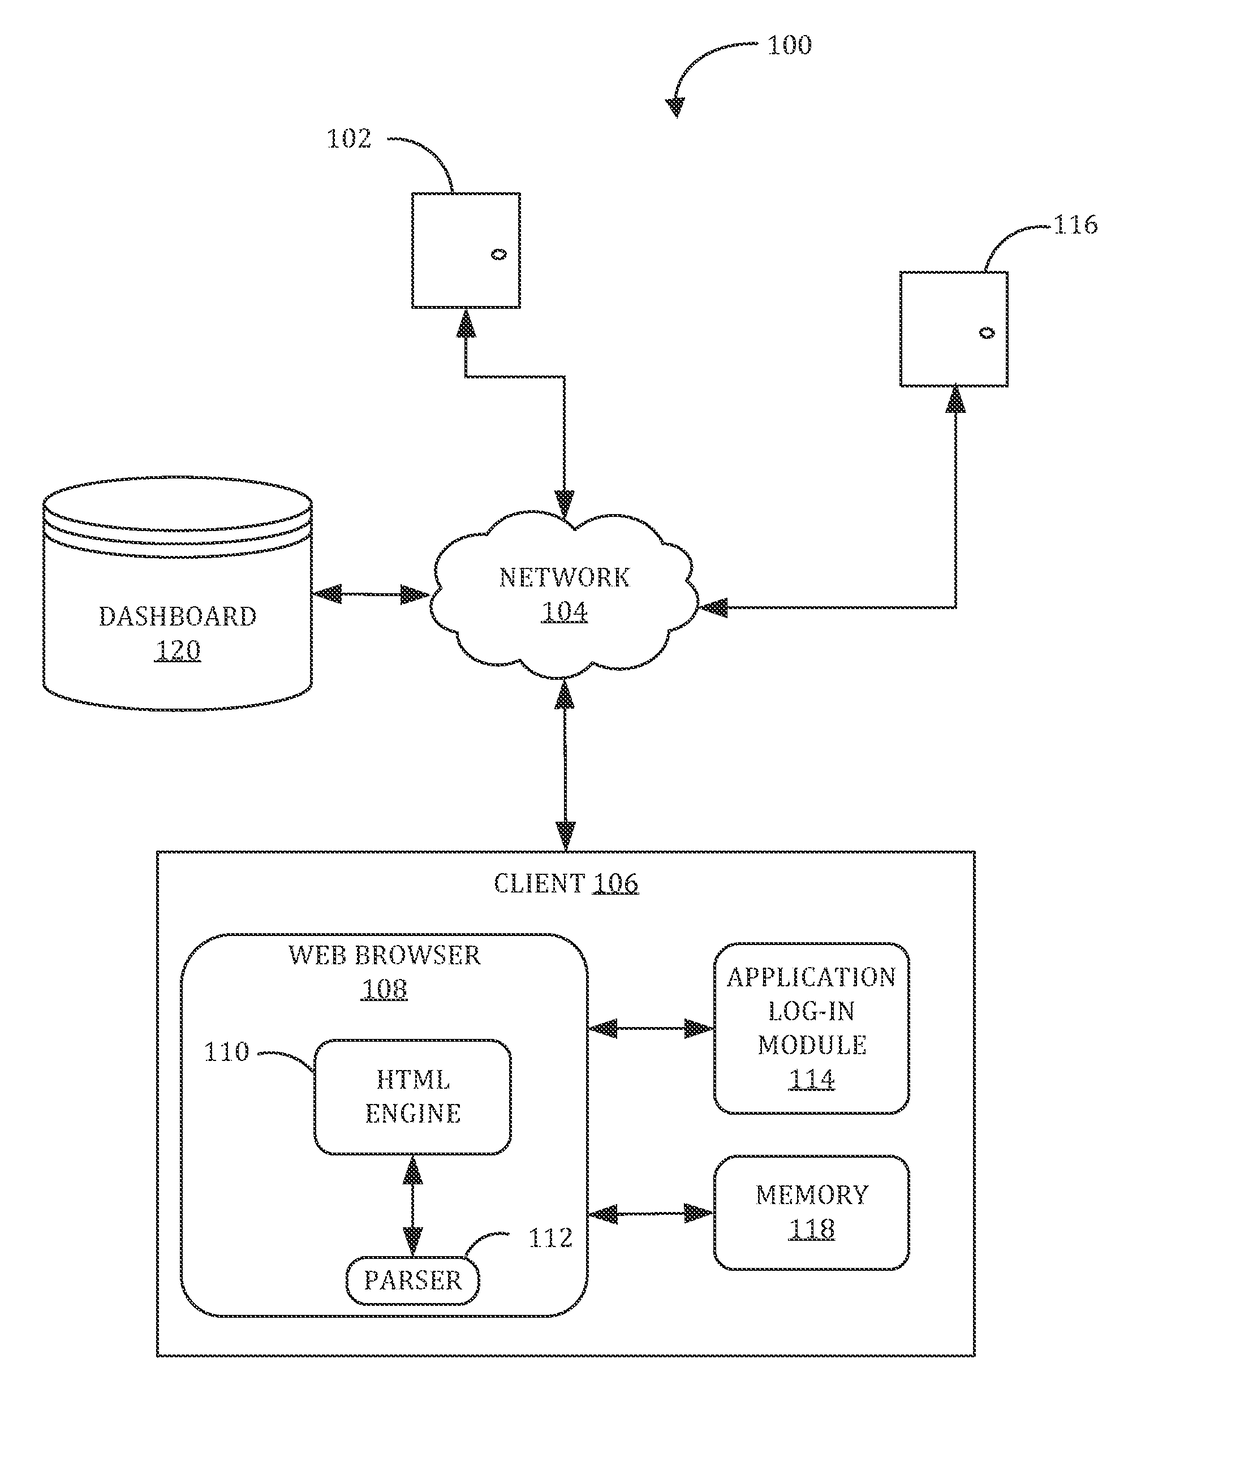 System and method for detecting whether automatic login to a website has succeeded